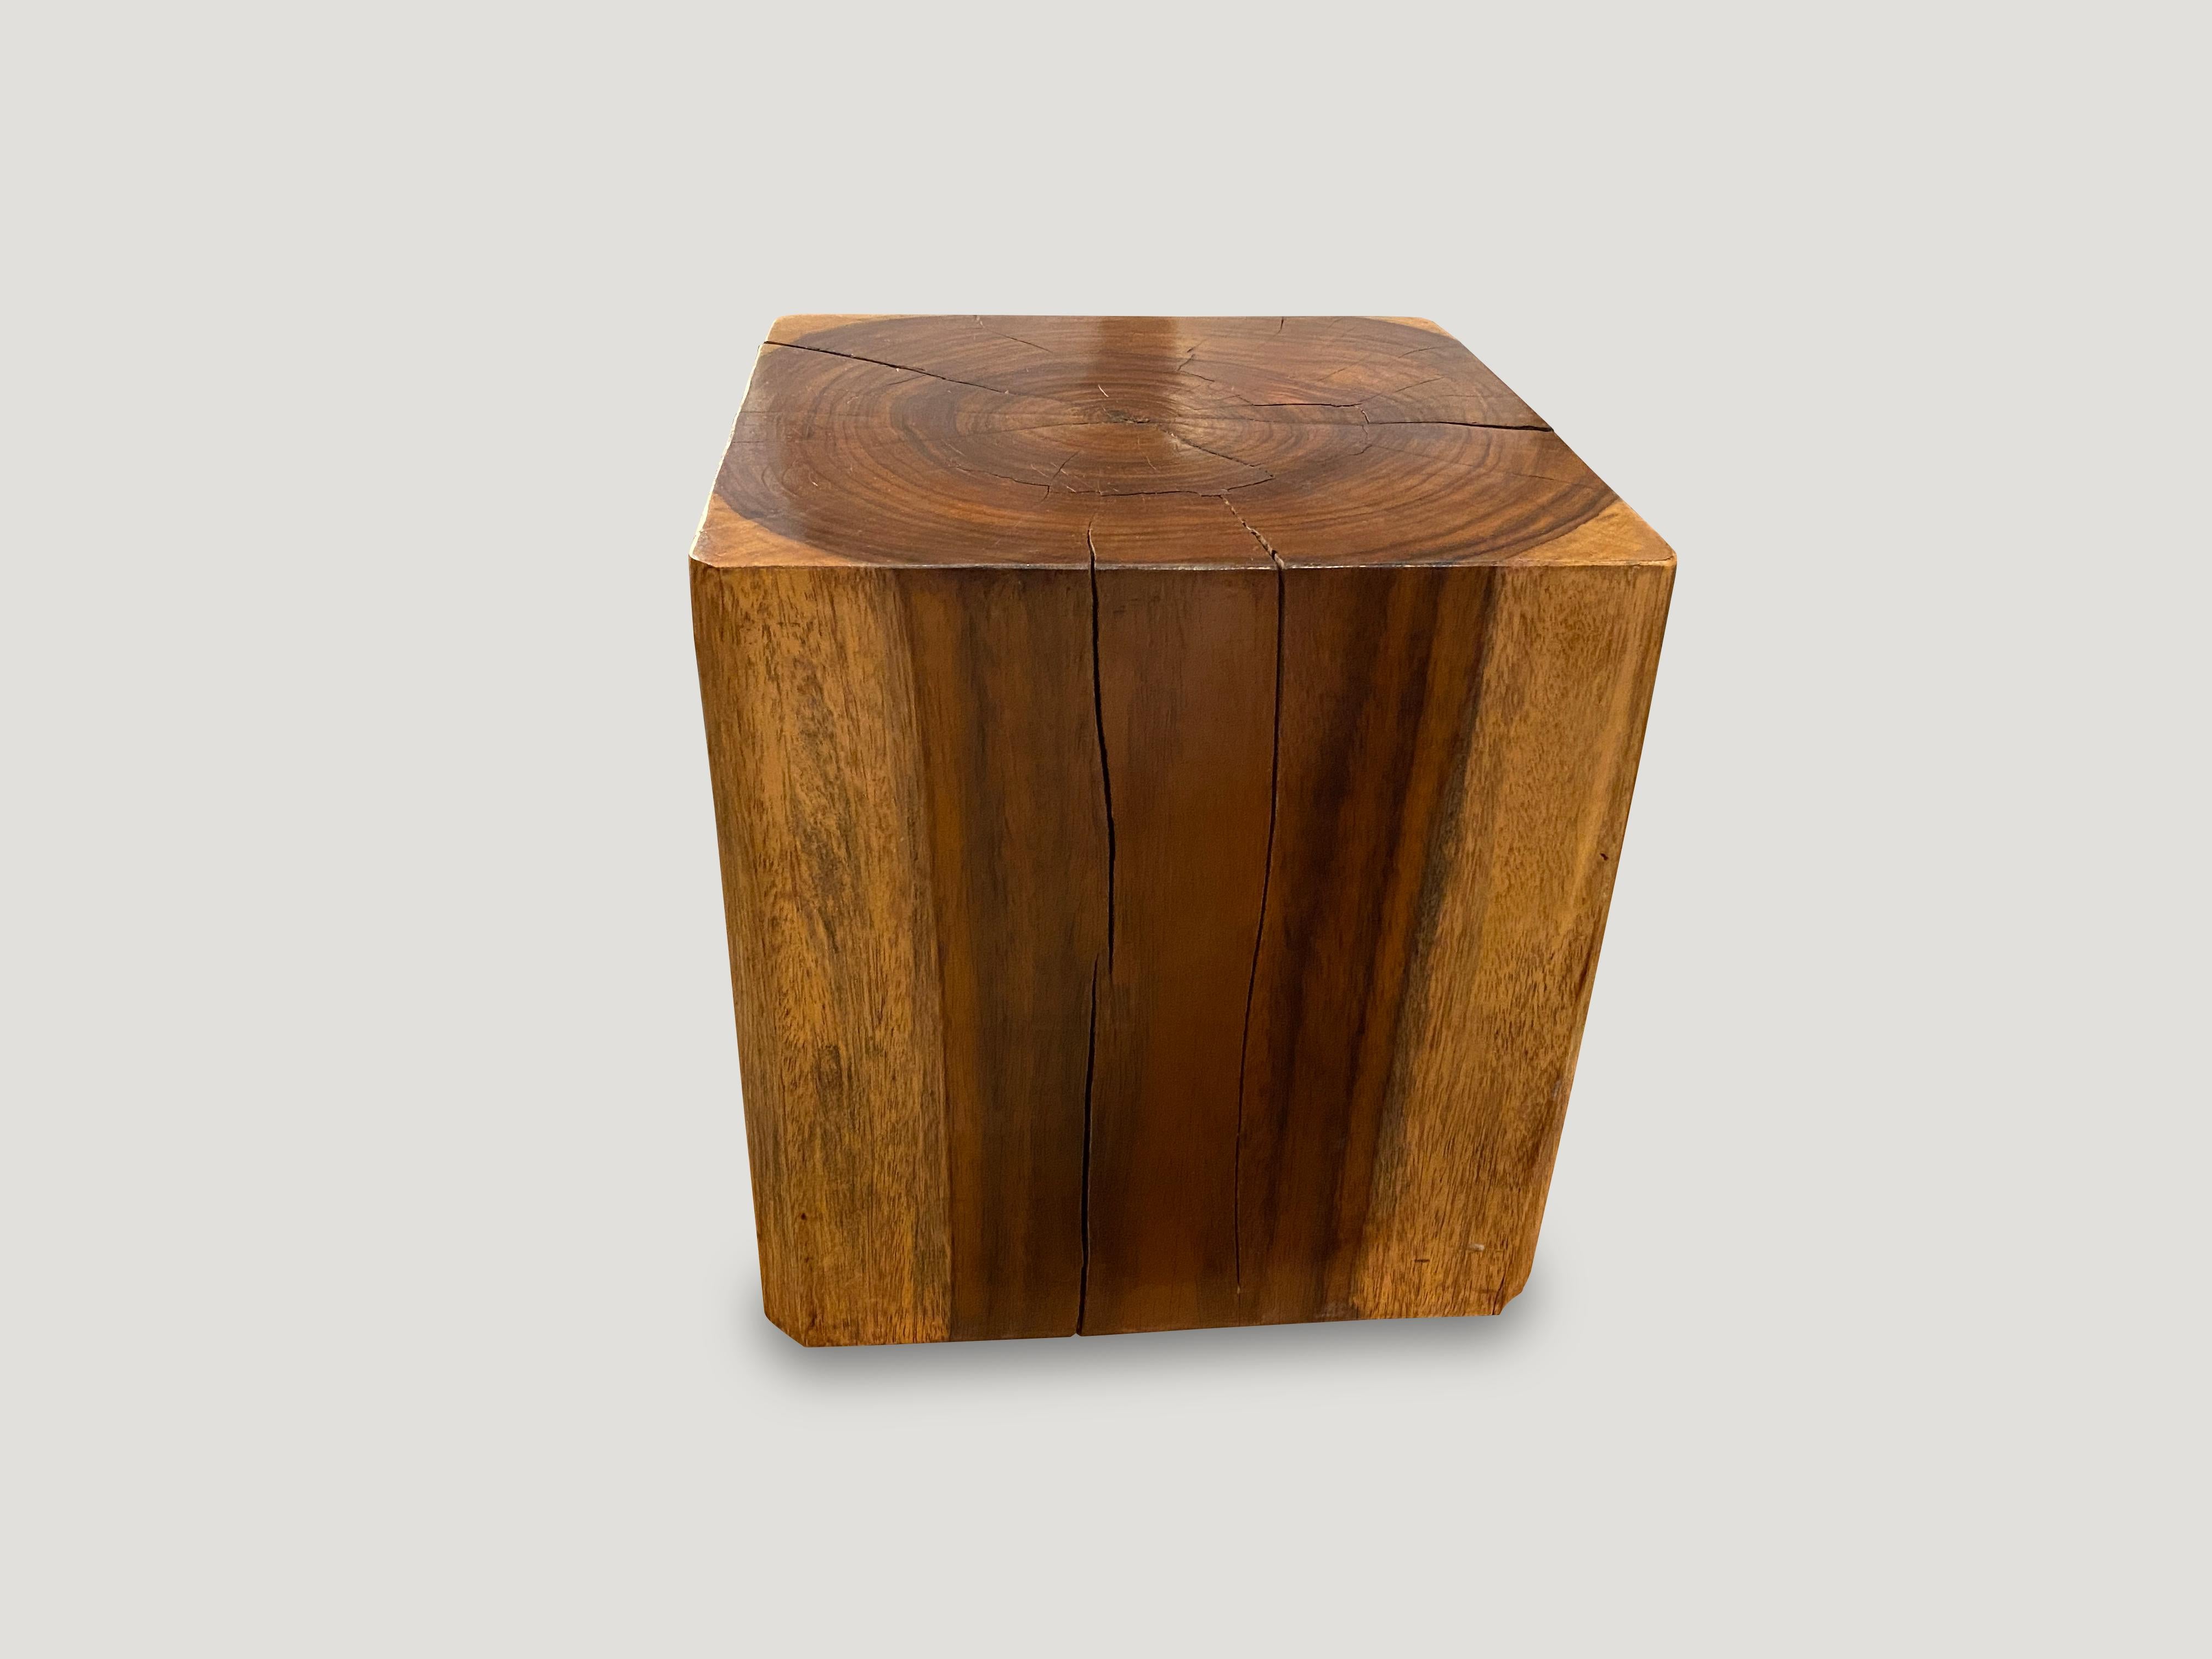 Midcentury style reclaimed sono wood side table. Natural contrasting color tones in this sono wood cube.

This side table was sourced in the spirit of wabi-sabi, a Japanese philosophy that beauty can be found in imperfection and impermanence. It